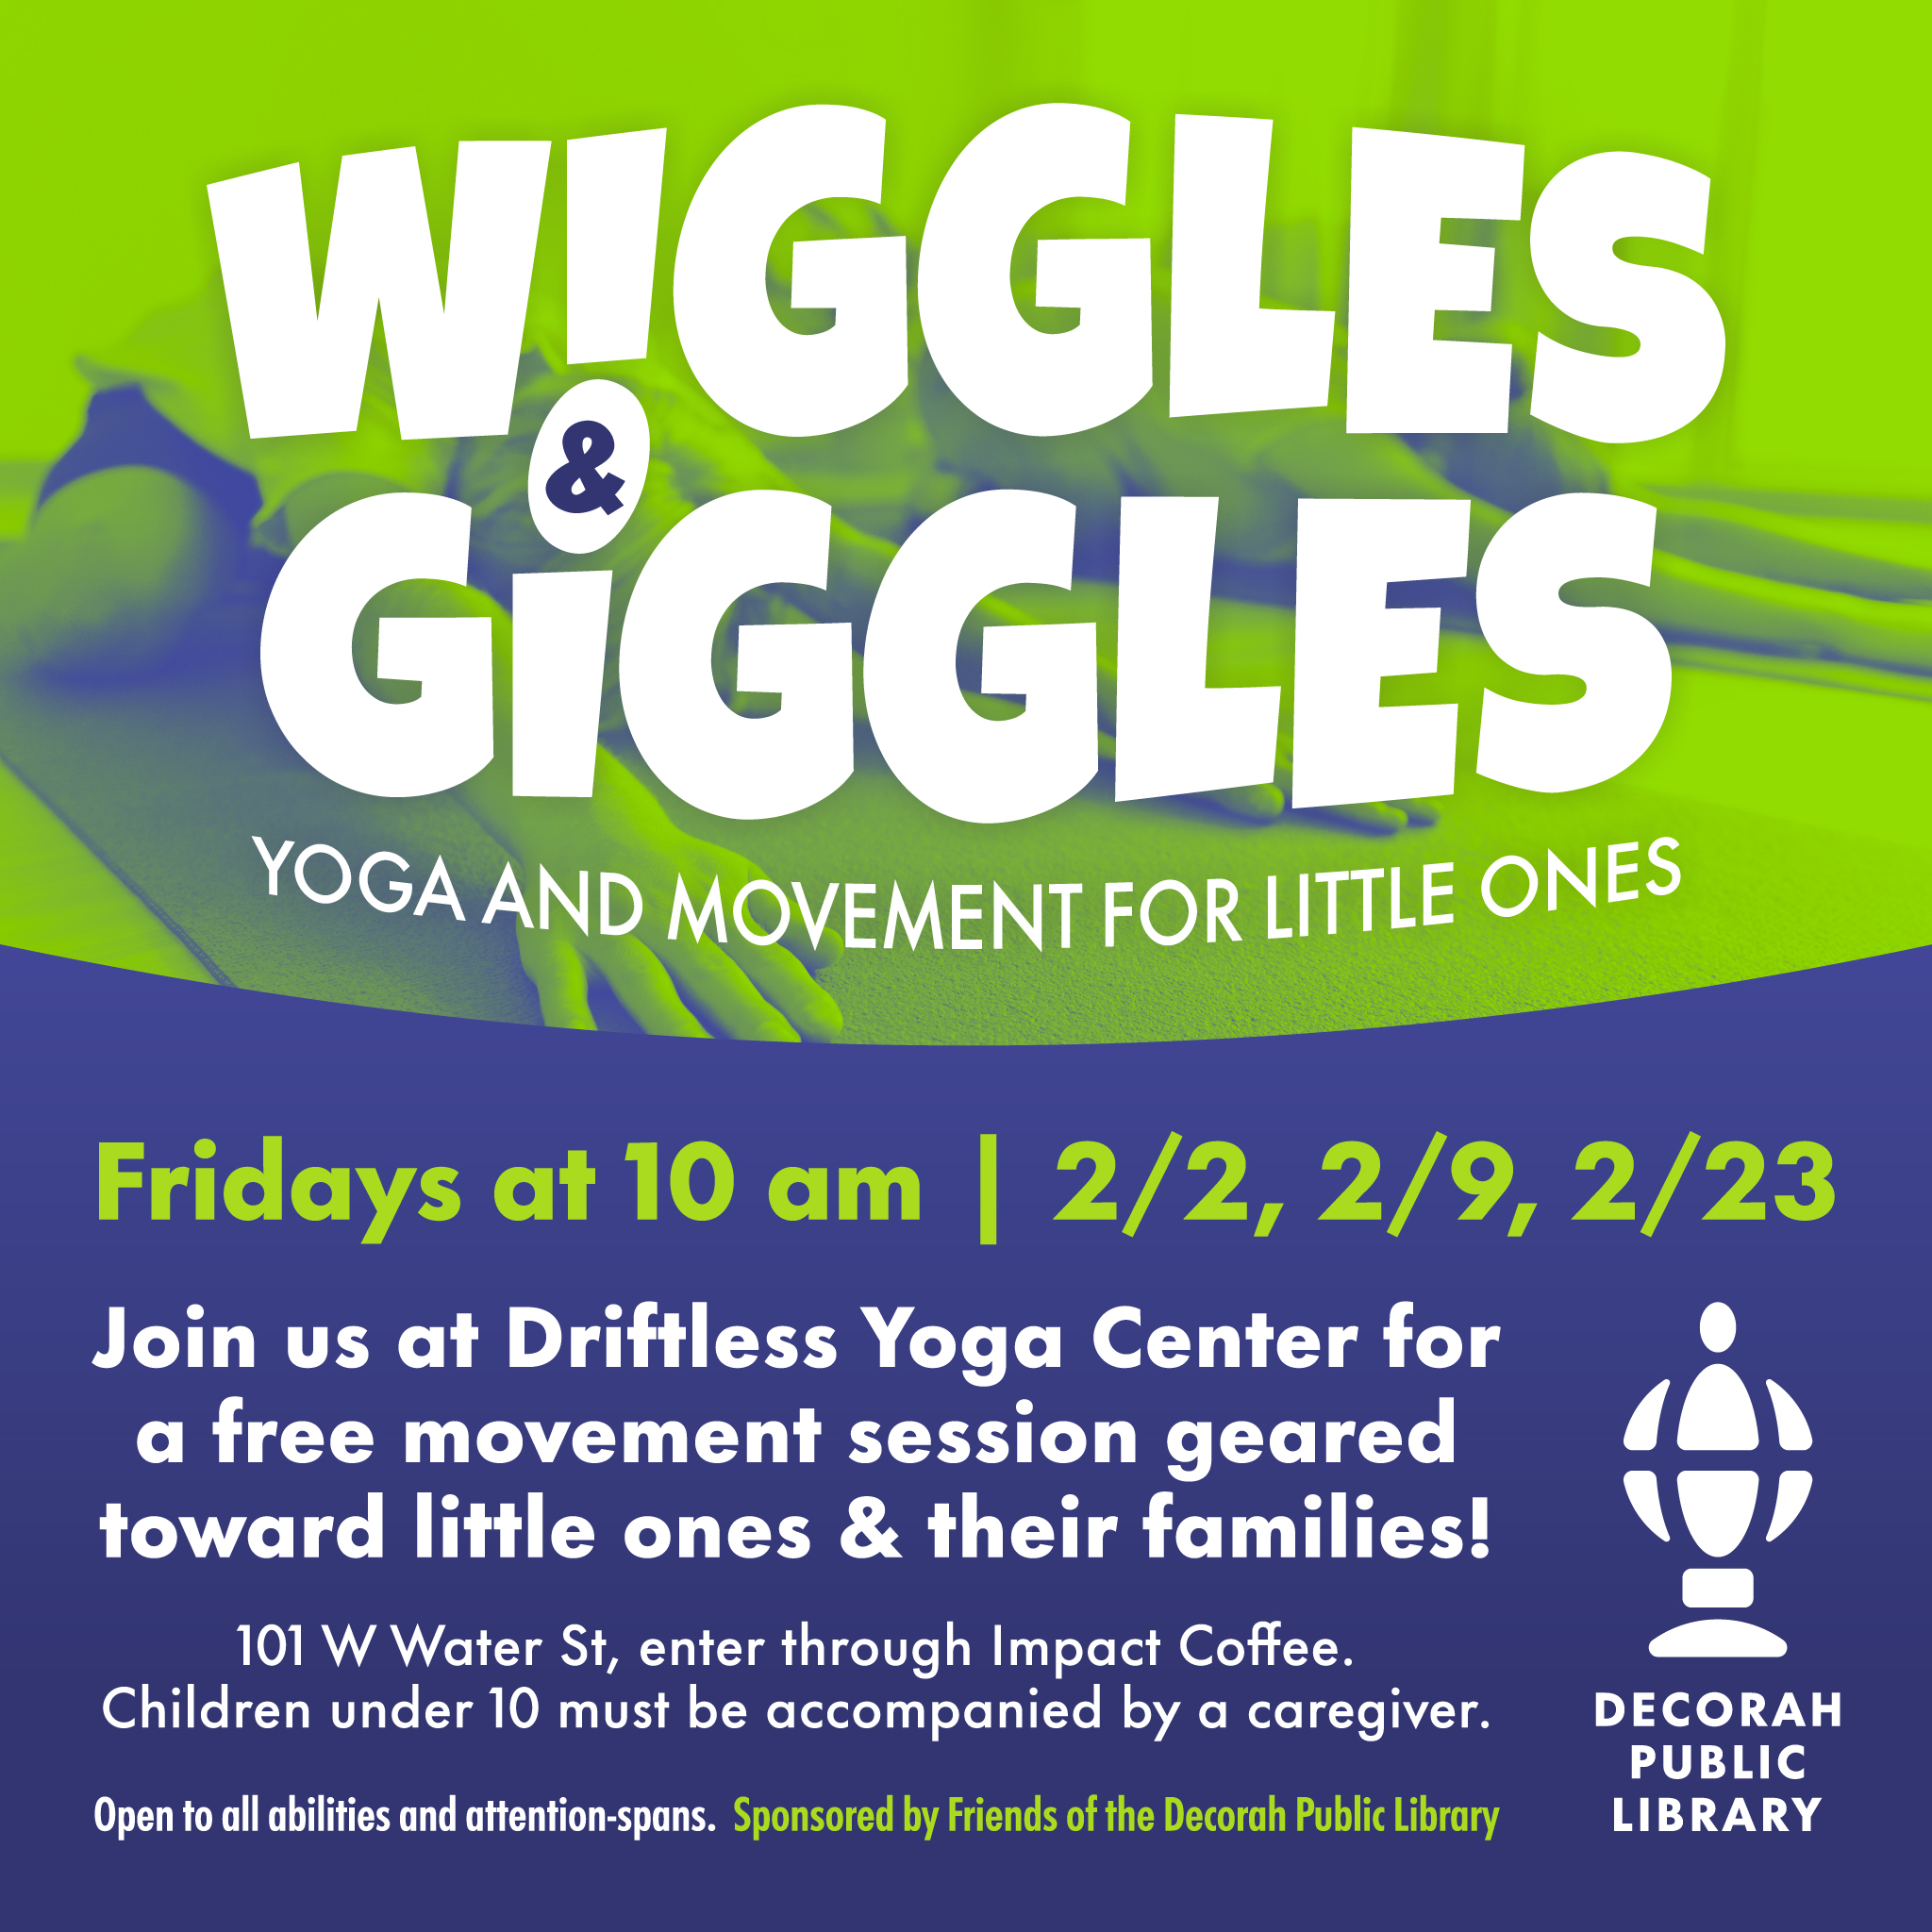 Wiggles & Giggles: Yoga and Movement for Little Ones thumbnail